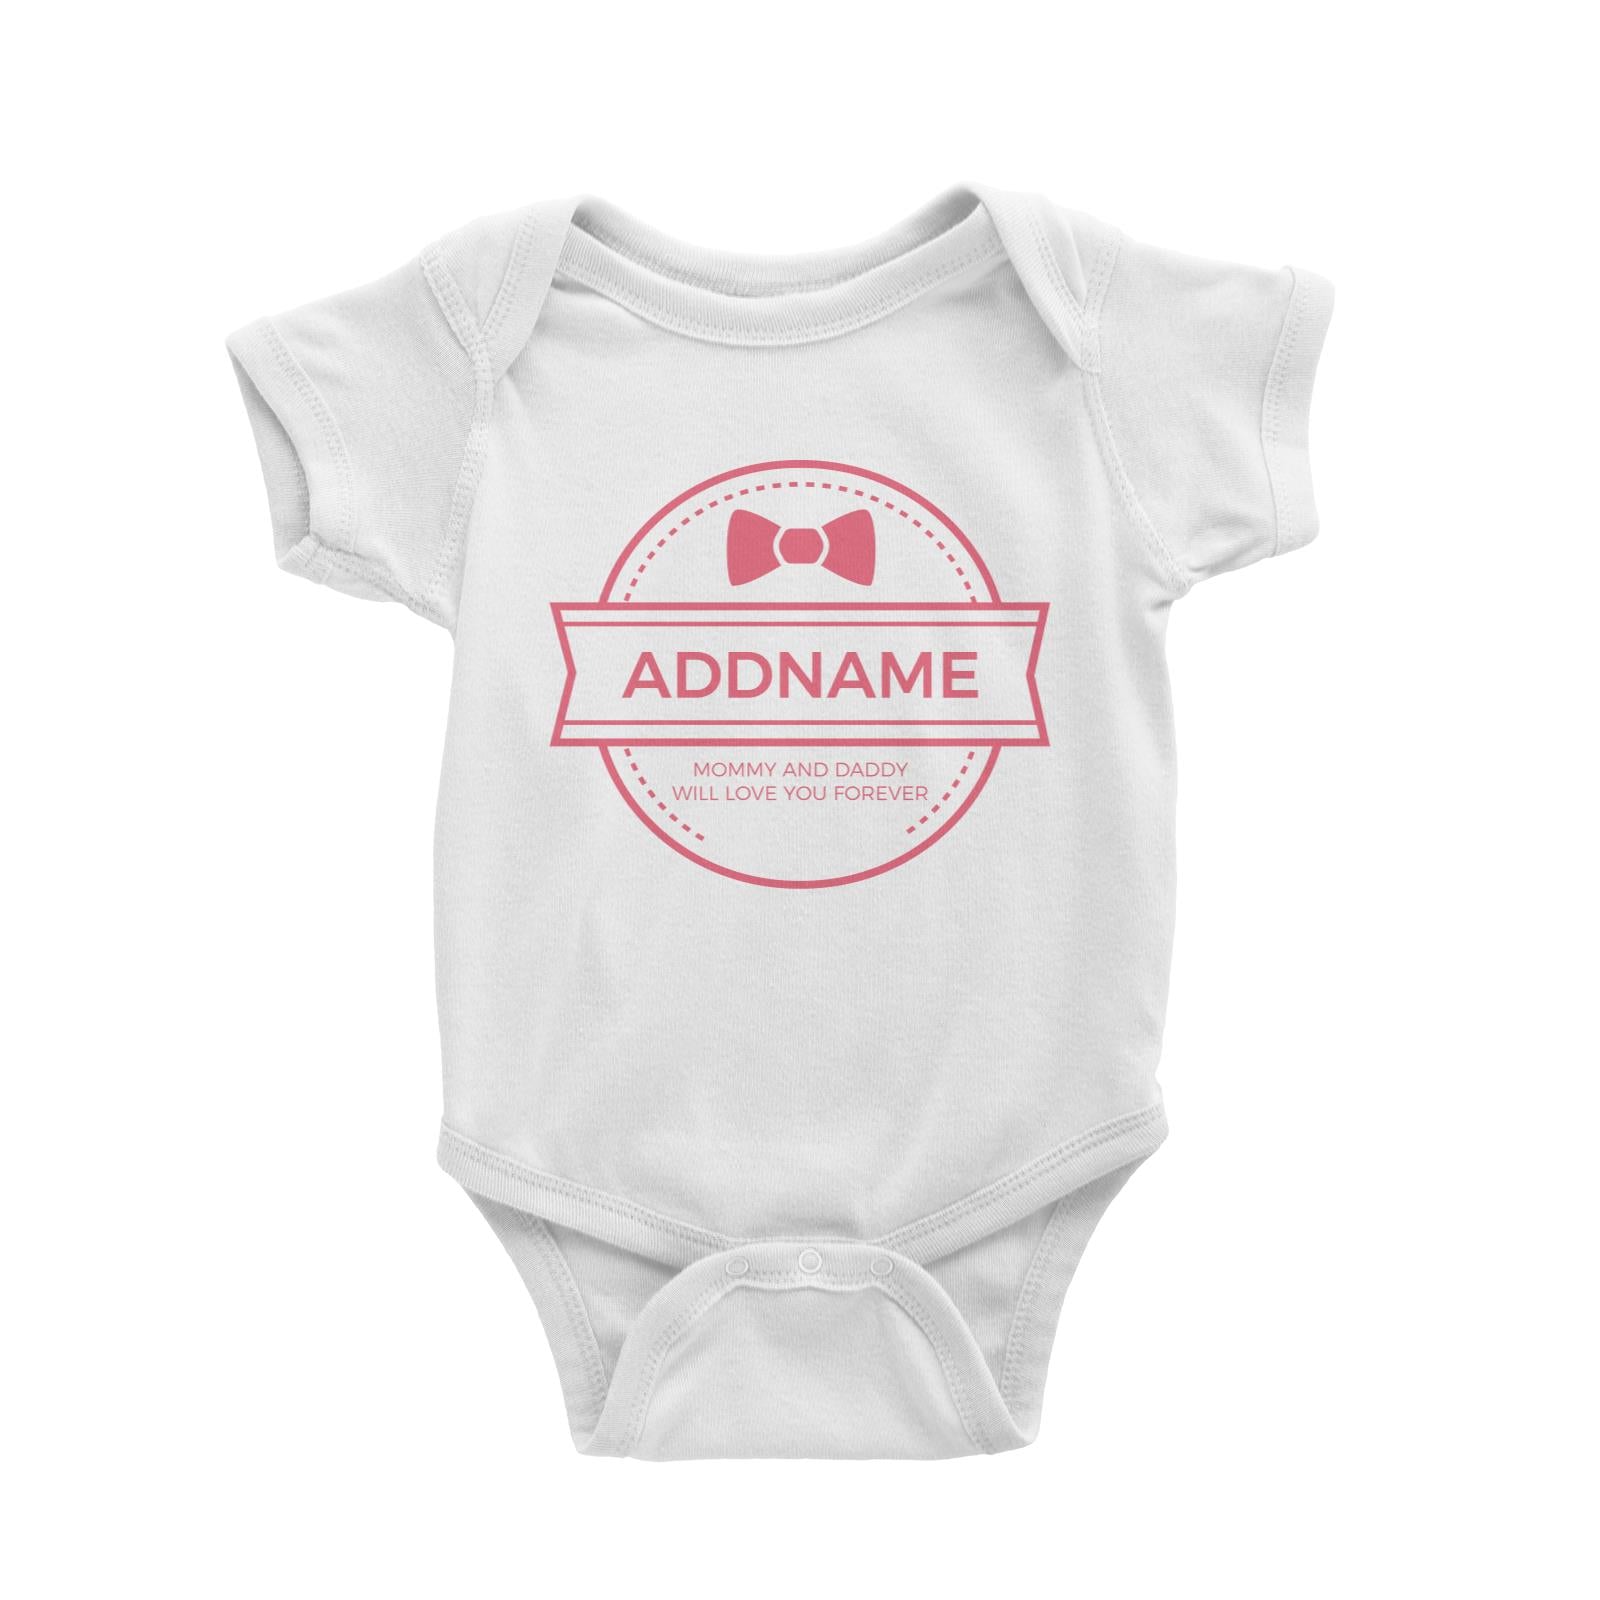 Ribbon Emblem Personalizable with Name and Text Baby Romper